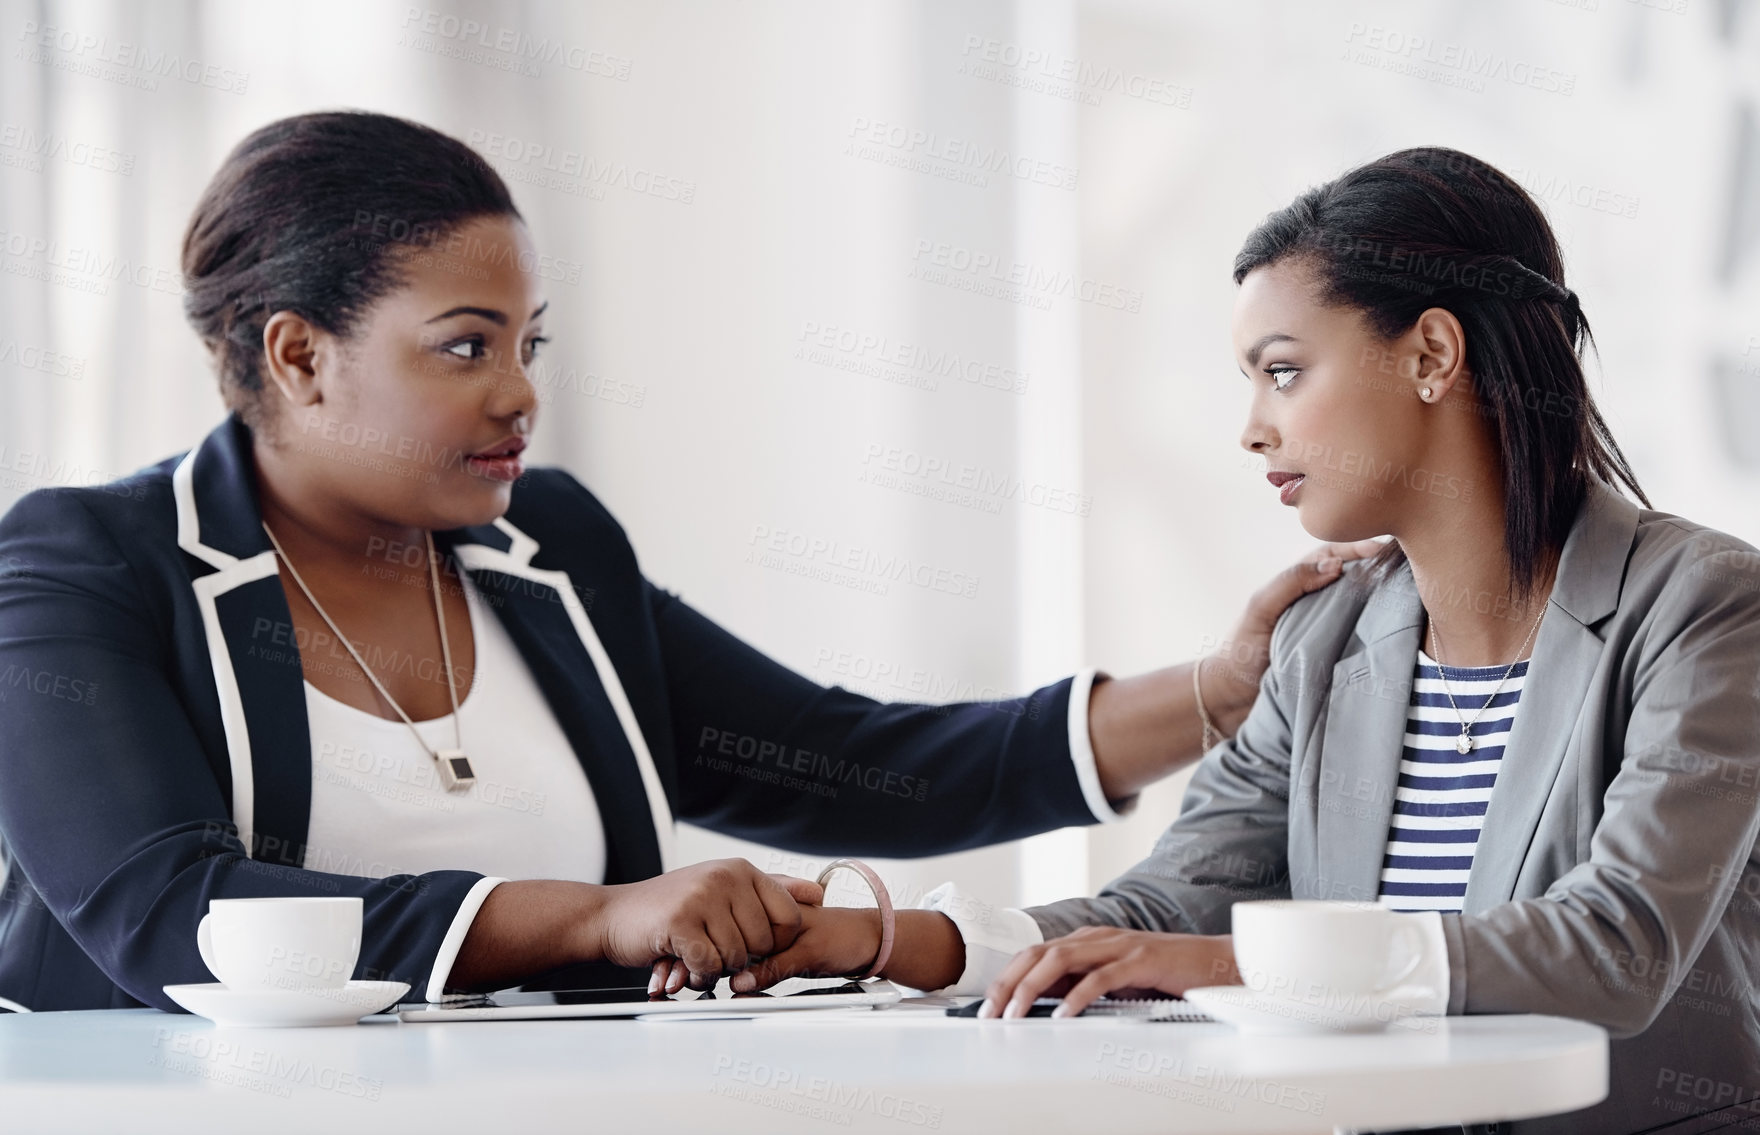 Buy stock photo Cropped shot of an attractive young businesswoman being consoled by a female colleague in their workplace